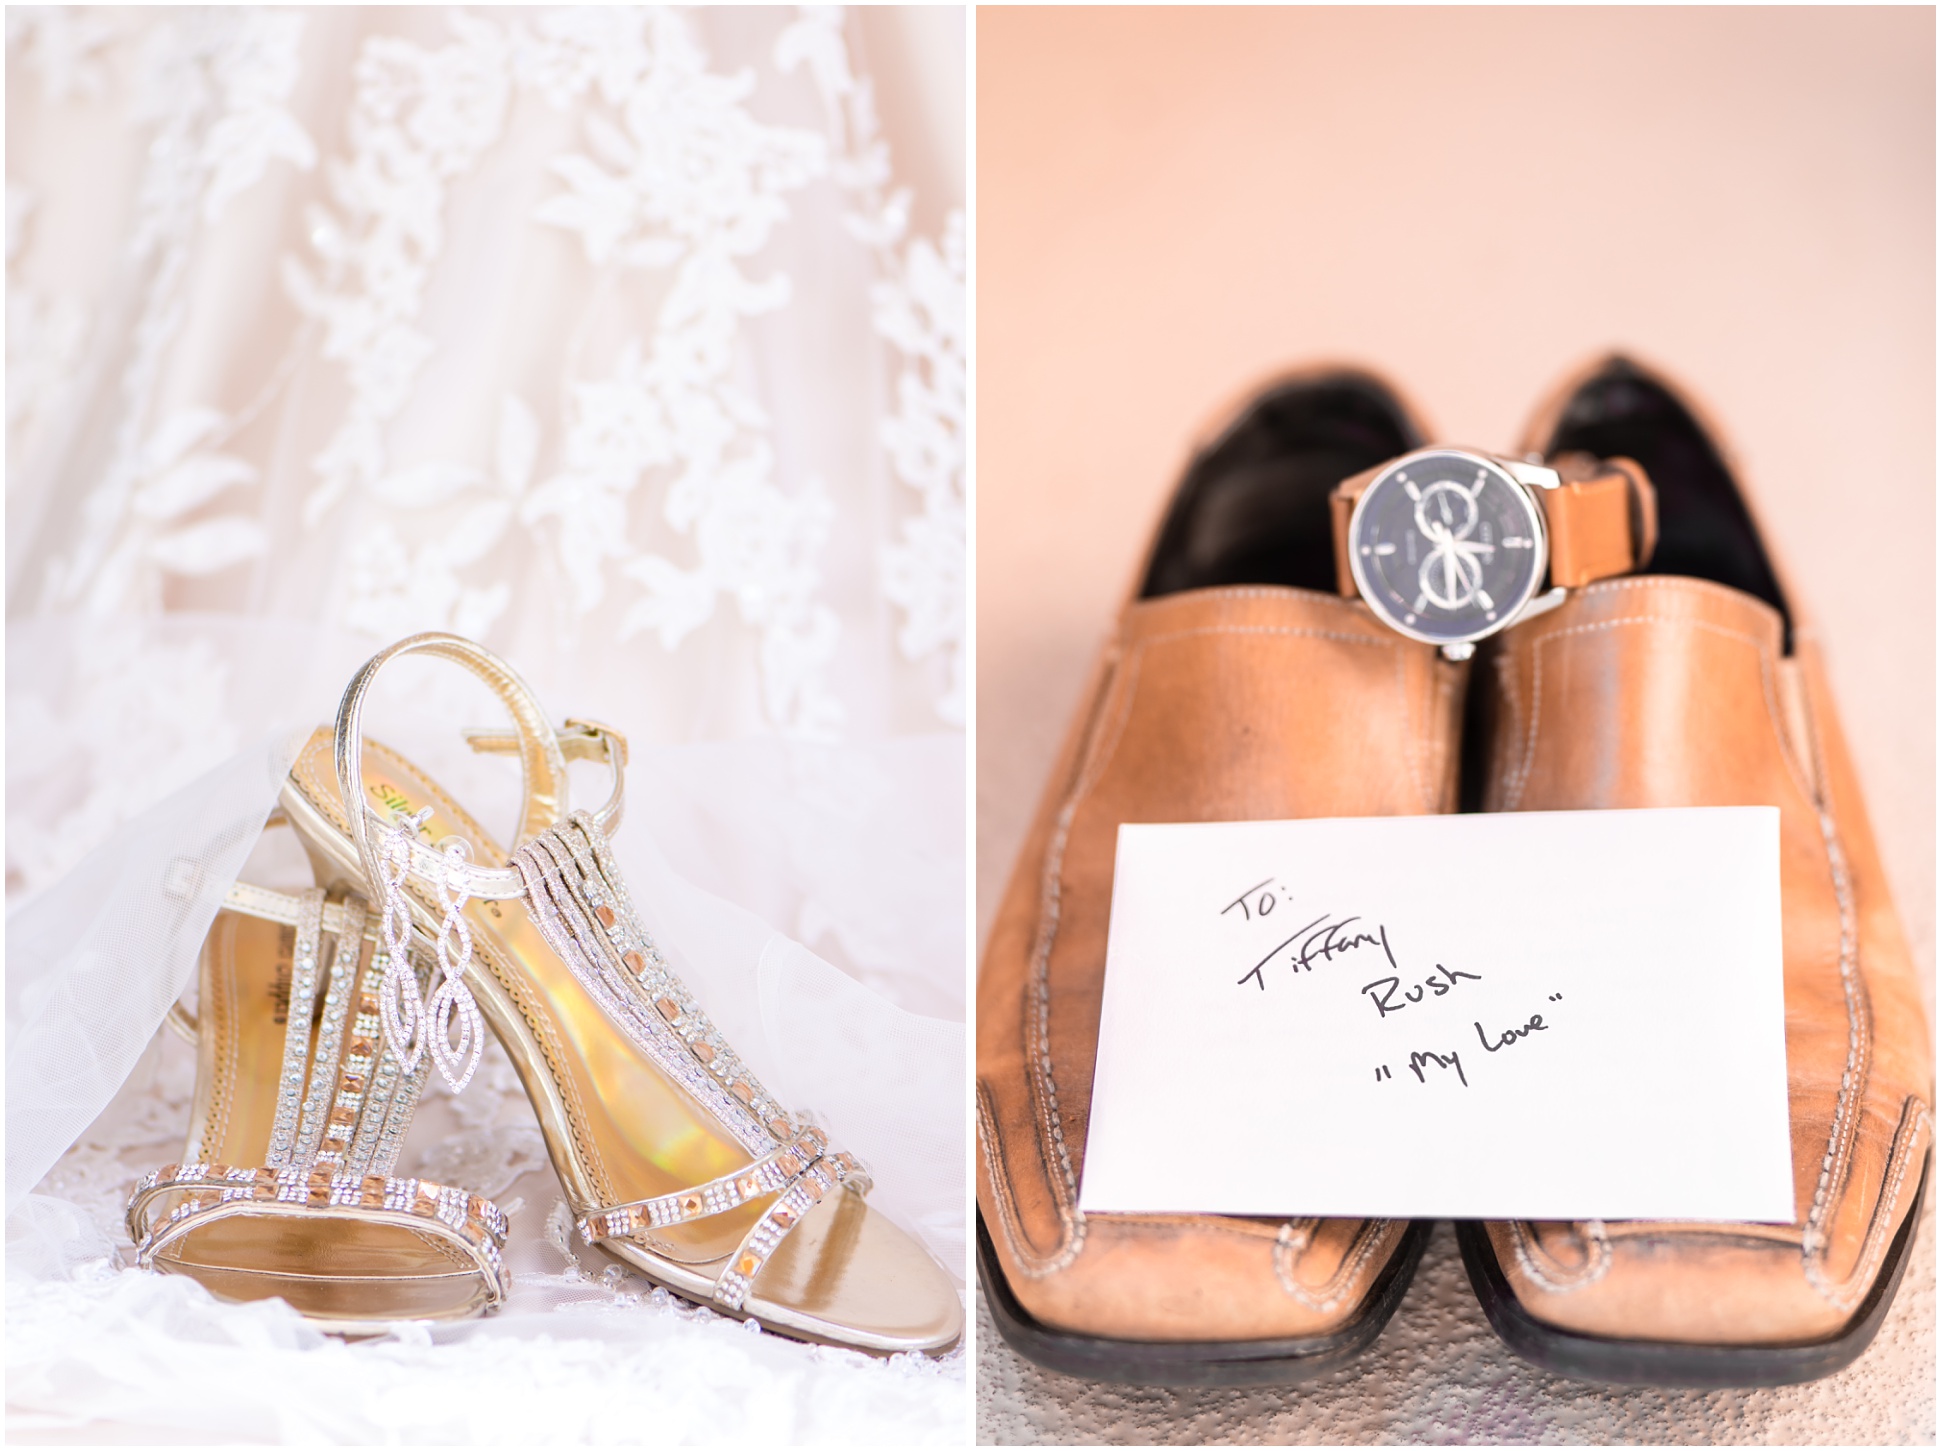 Left Image: Bride's Golden Sparkly Heels, Right Image: Grooms Shoes and Note to his Bride